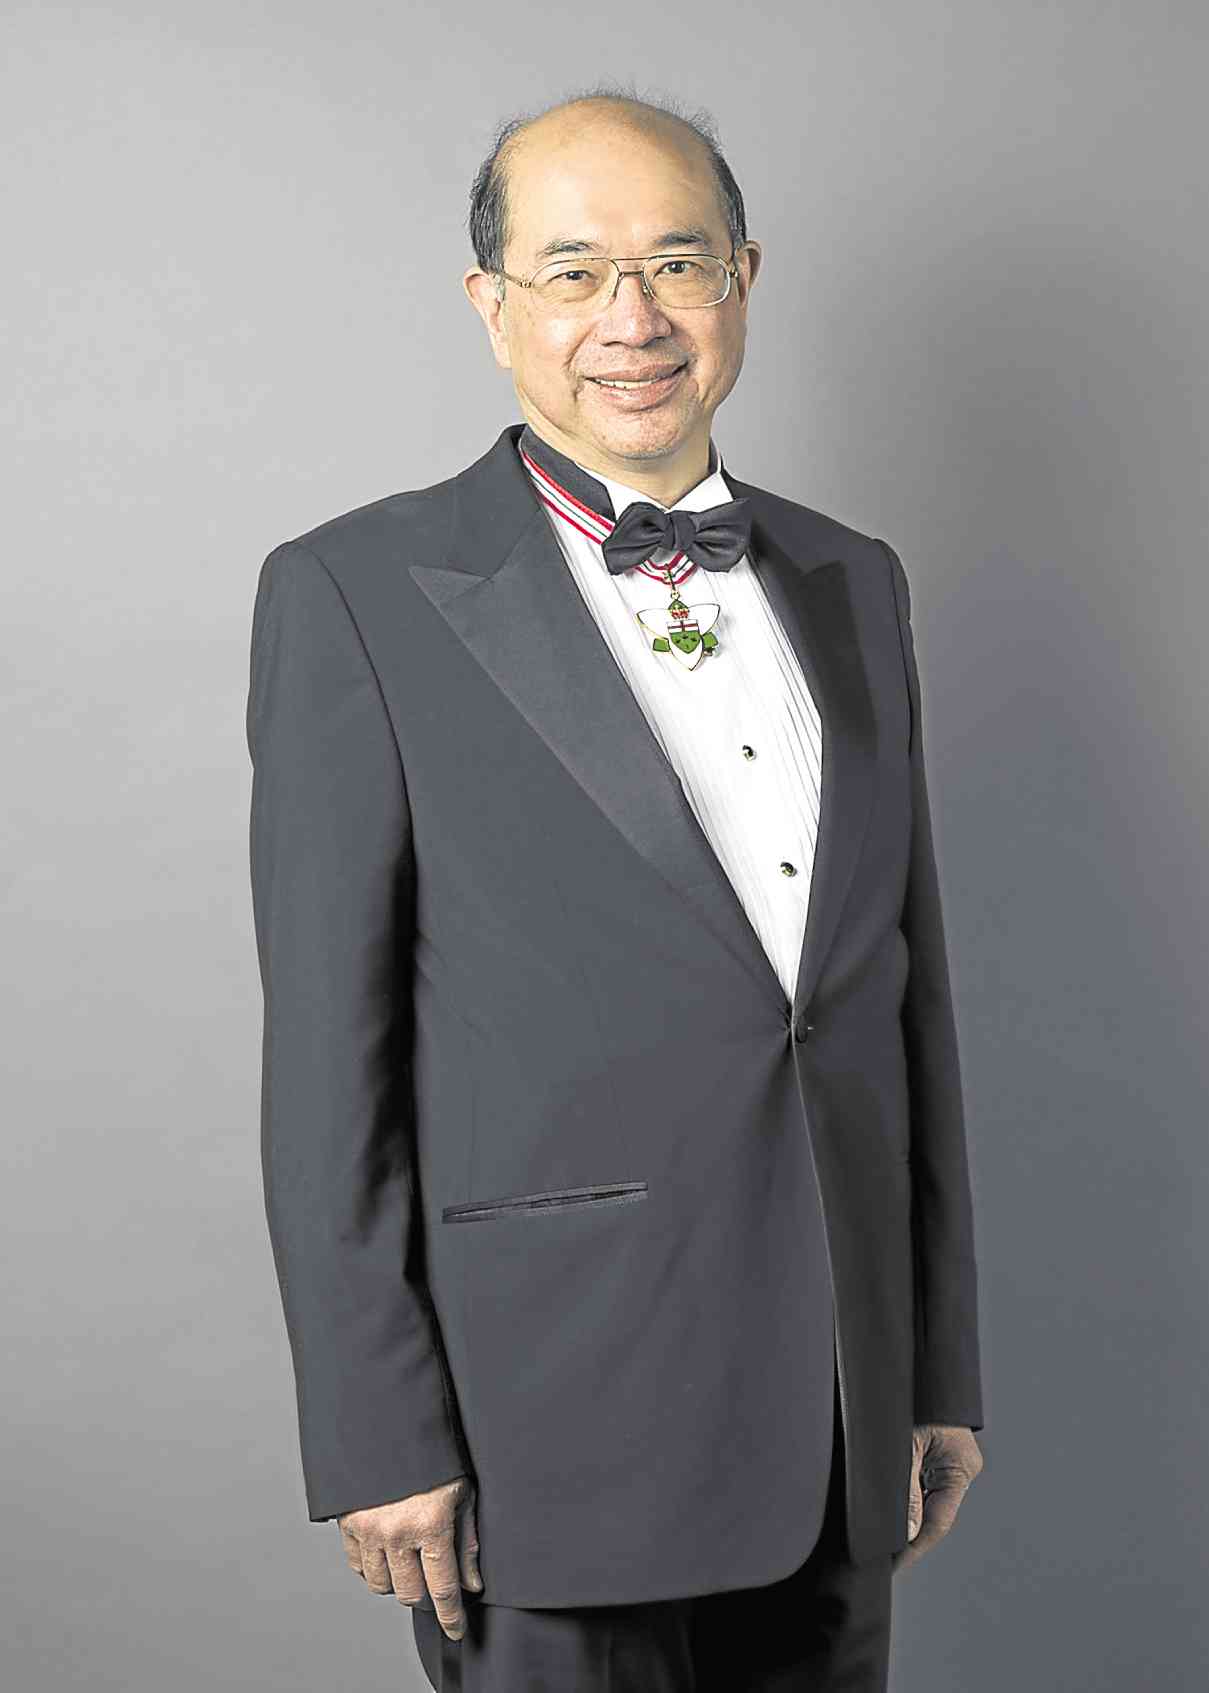 DR.HERBERT Gaisanowears the prestigious Order ofOntario. His achievements were recognized by the 2013 Nobel Prize laureate in medicine as fundamental to advancements in the treatment of diabetes.